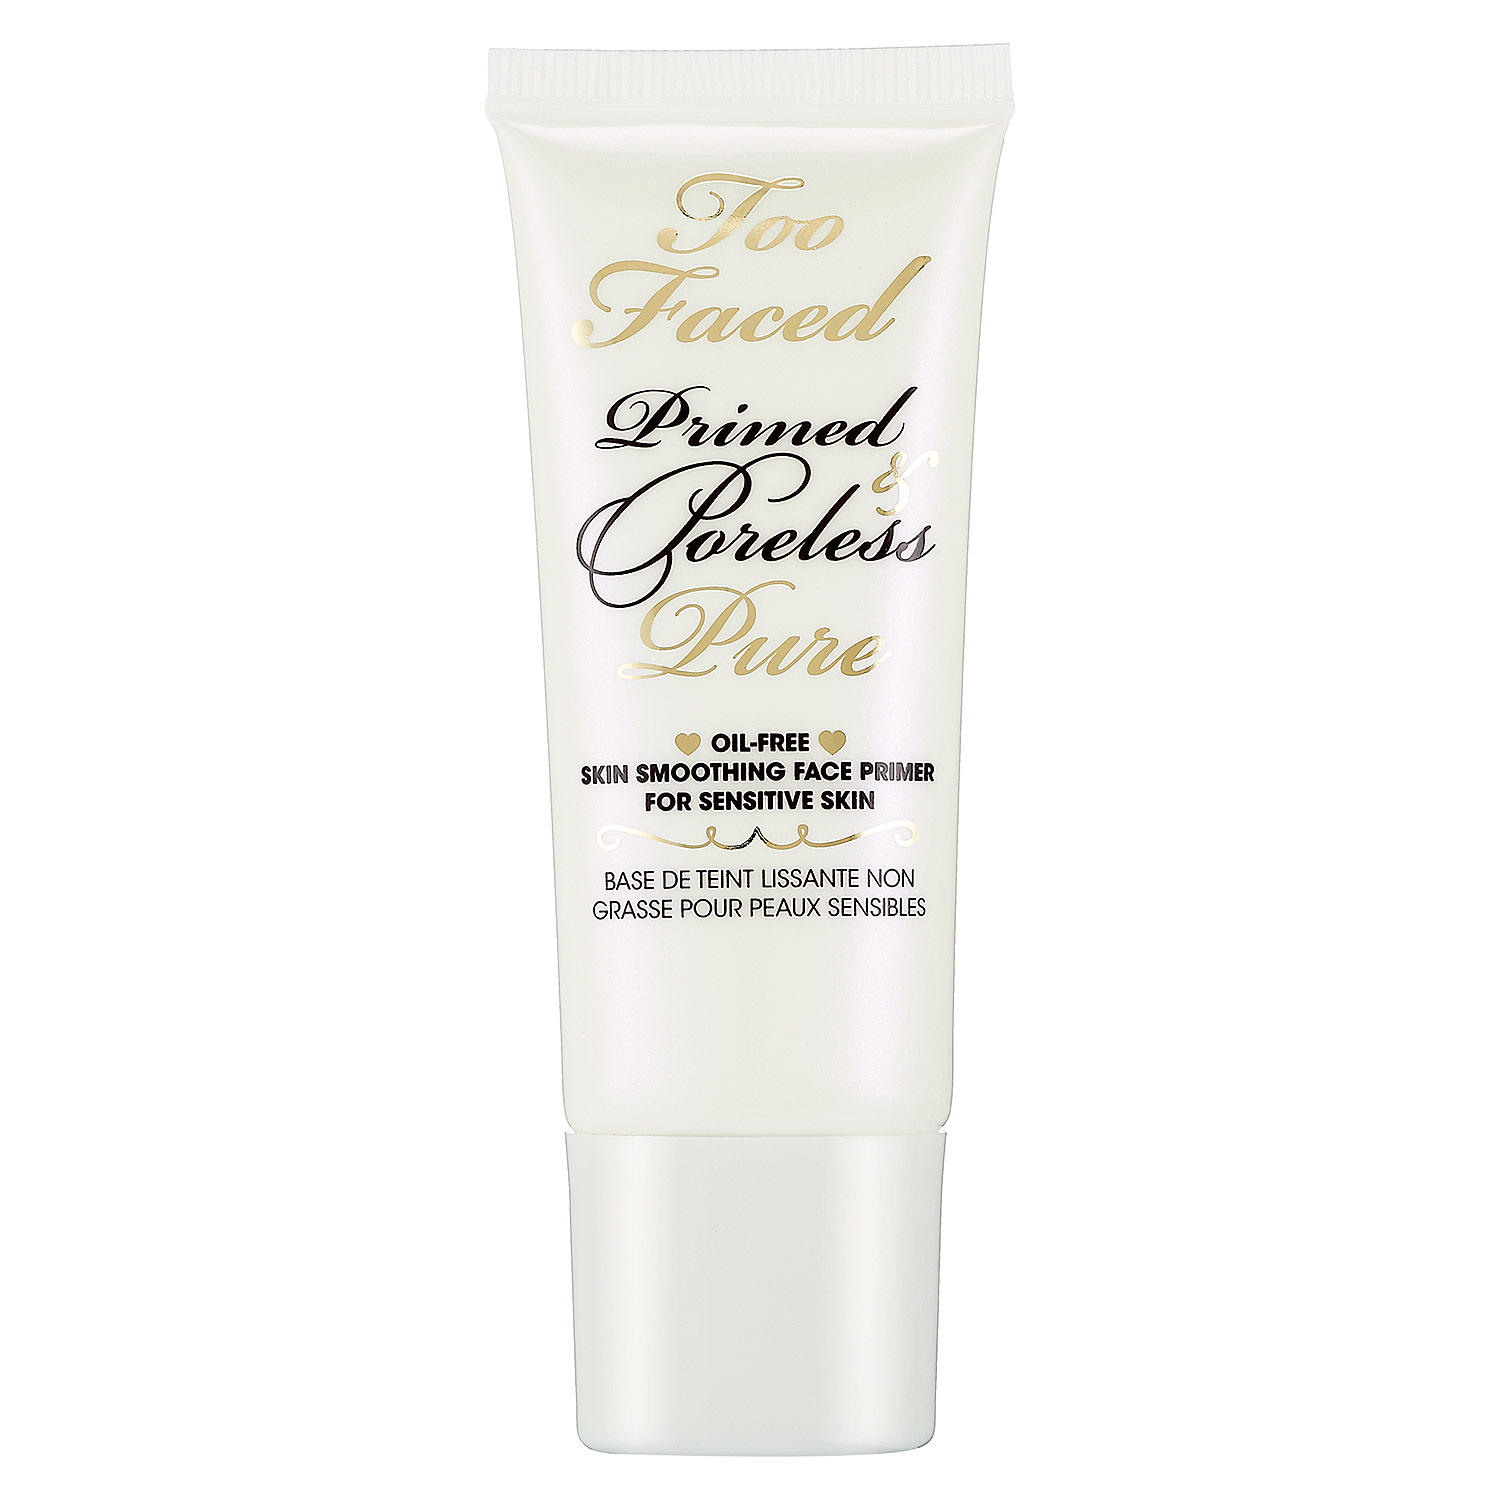 Too Faced Primed and Poreless Pure